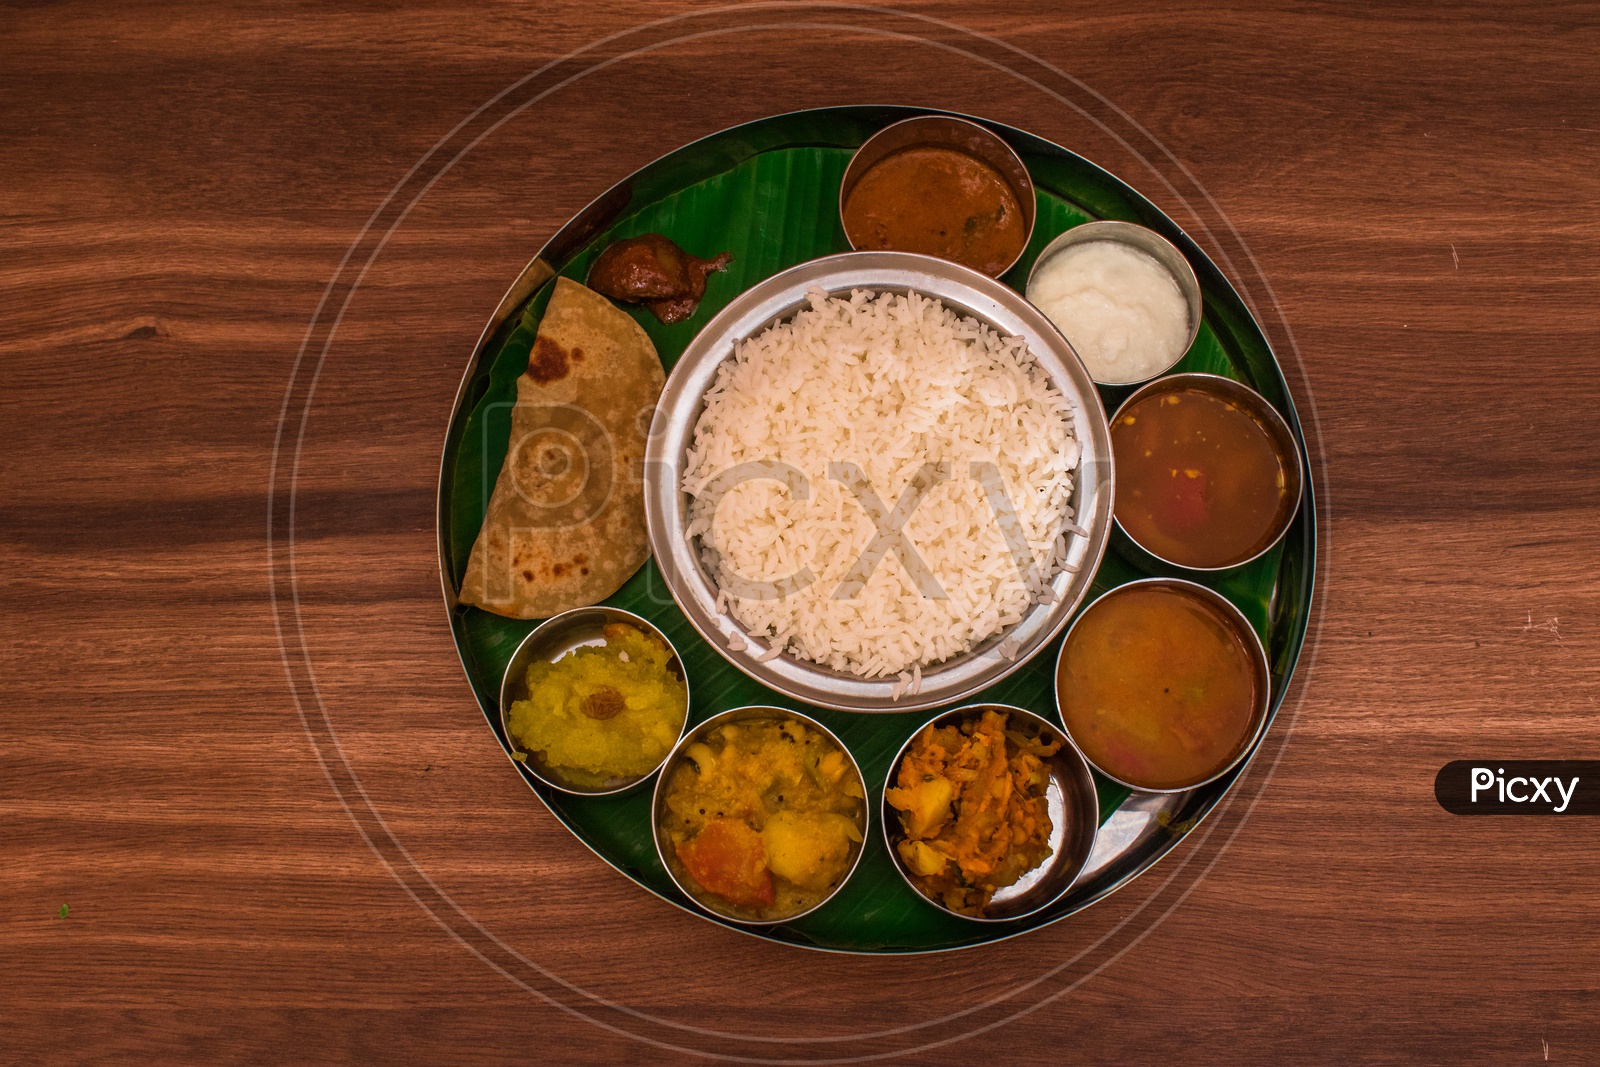 A typical Veg Thali / Food Platter For Lunch / Dinner Meal